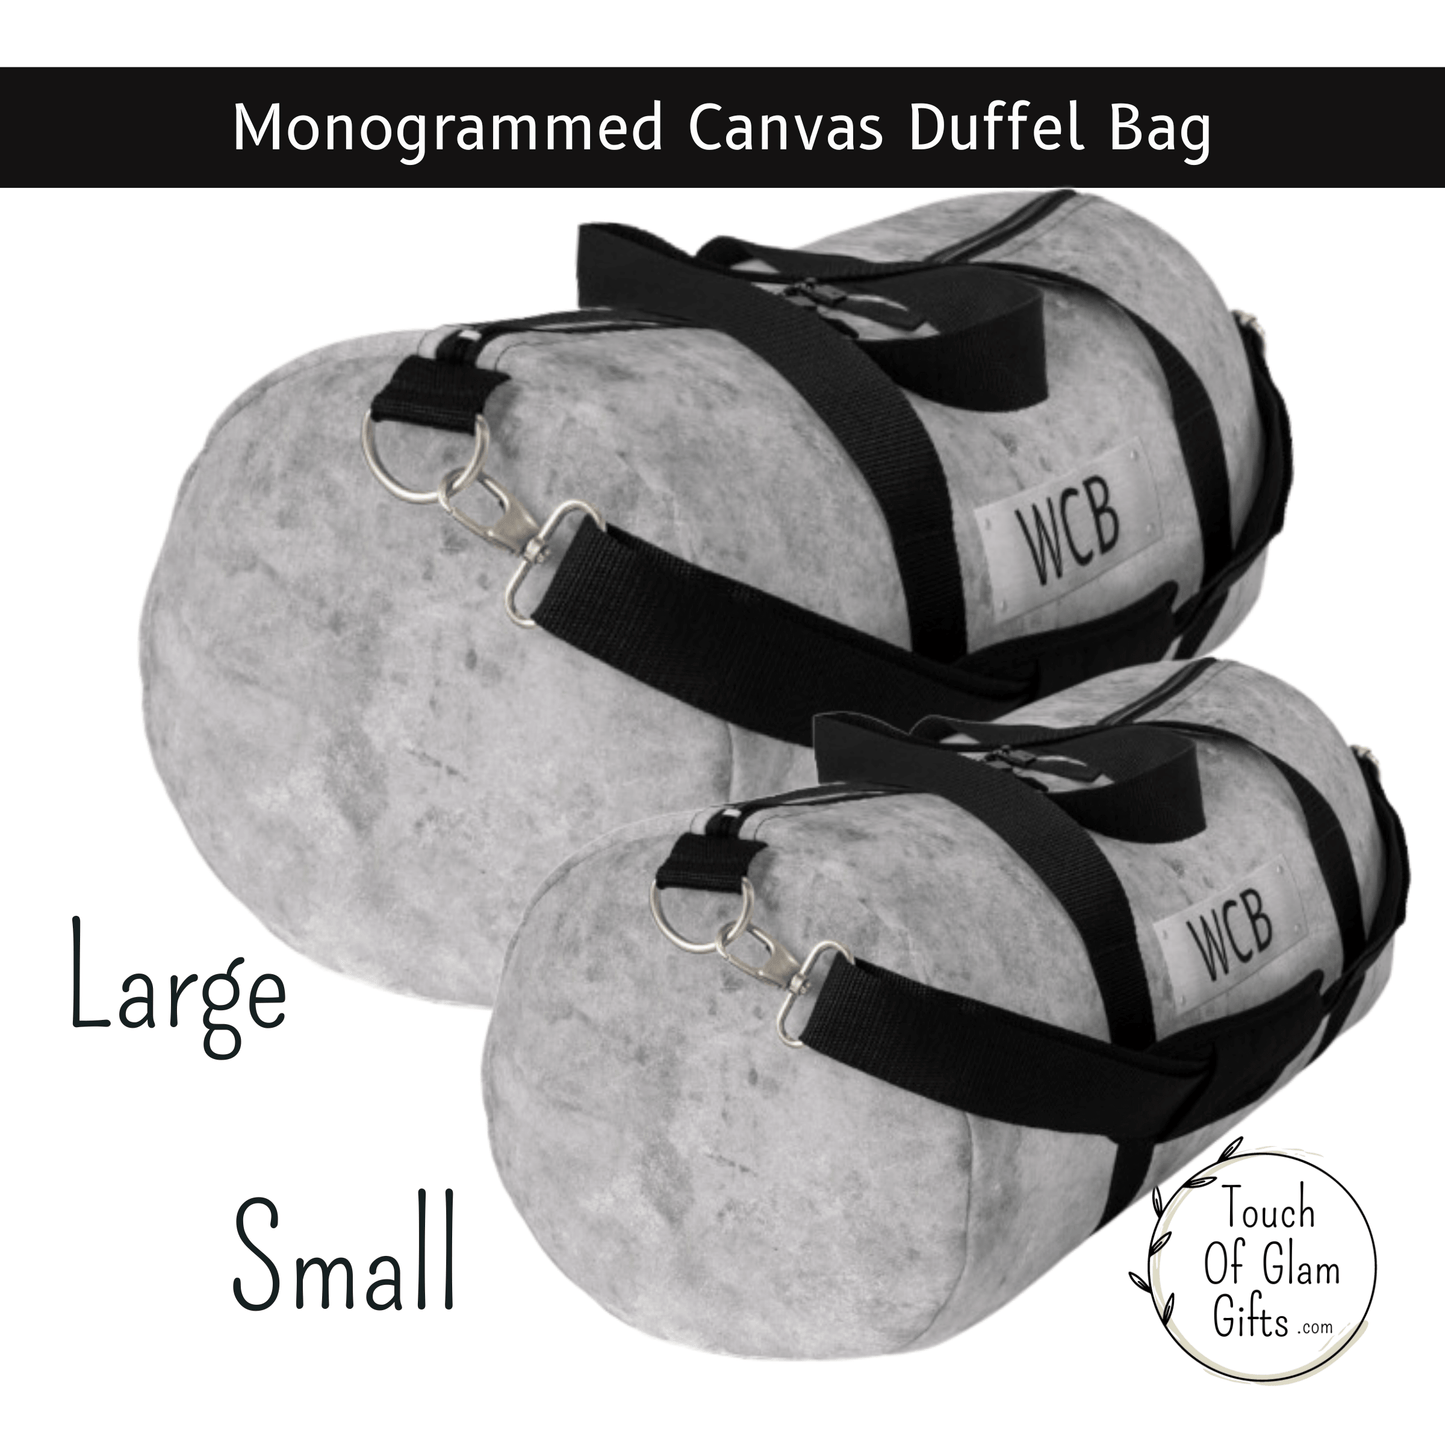 Our grey duffel bag comes in two sizes. The large and small canvas bag is the same for both. The steel plate with your initials can be customized with up to three letters.